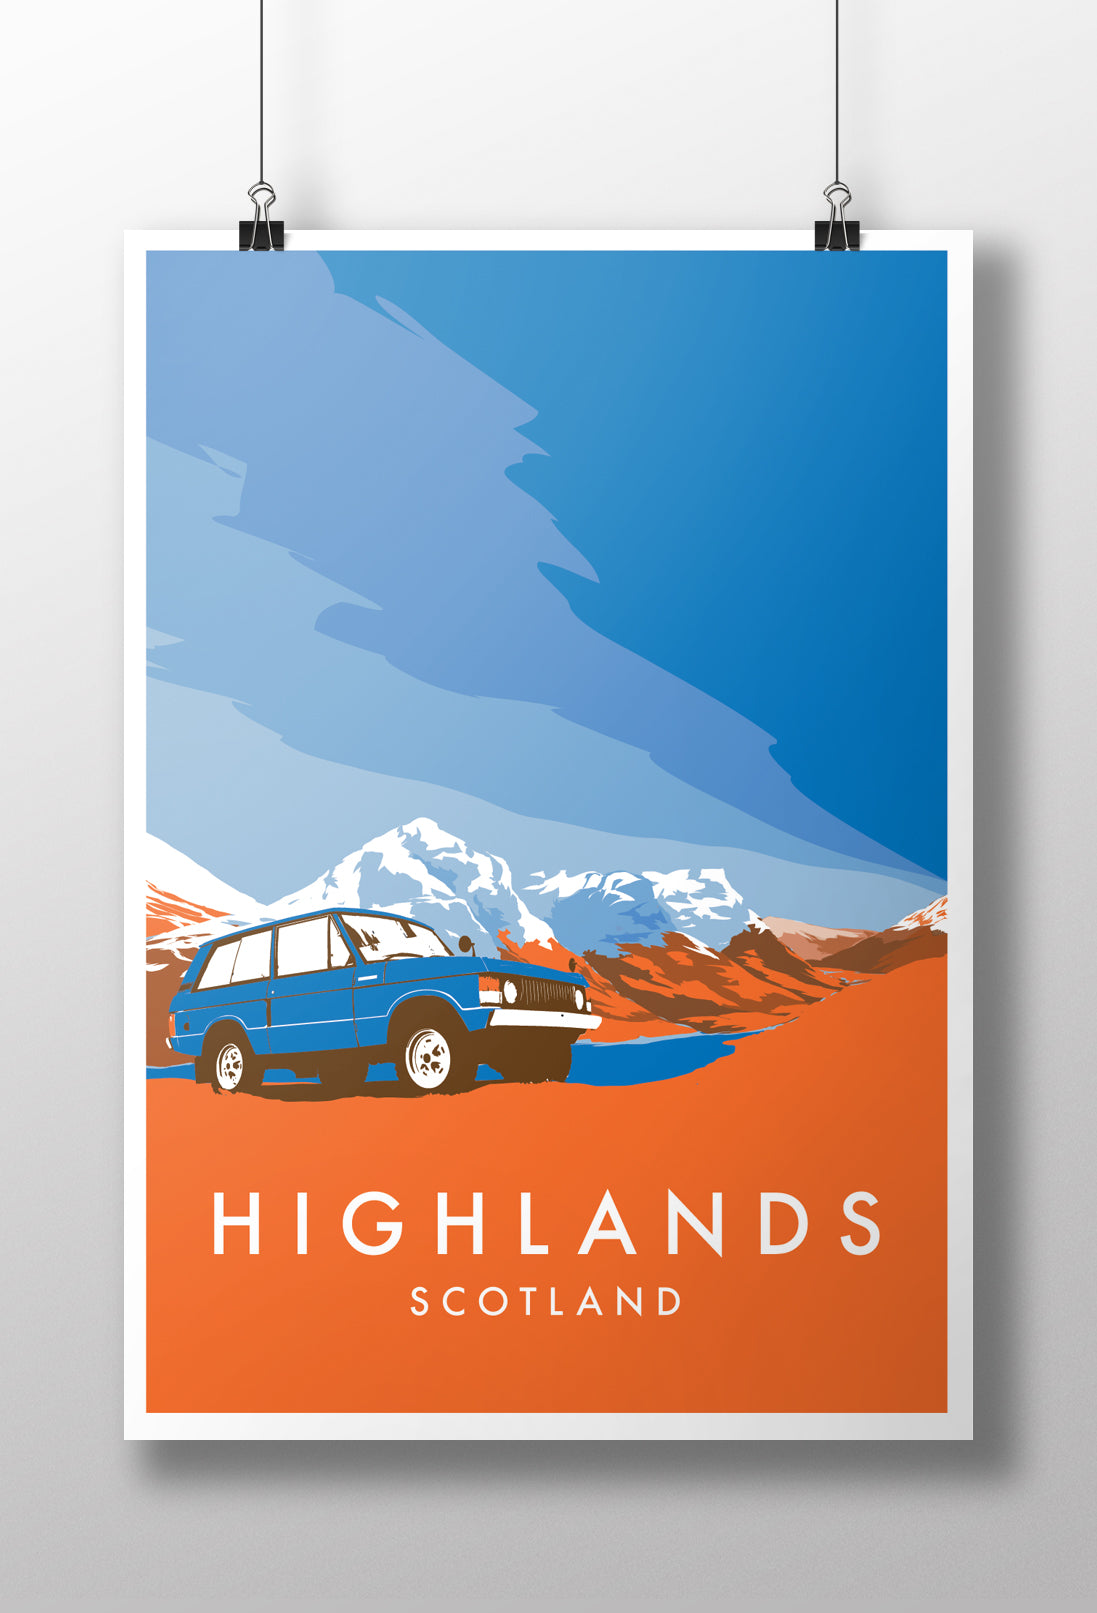 'Highlands' Early RRC Prints